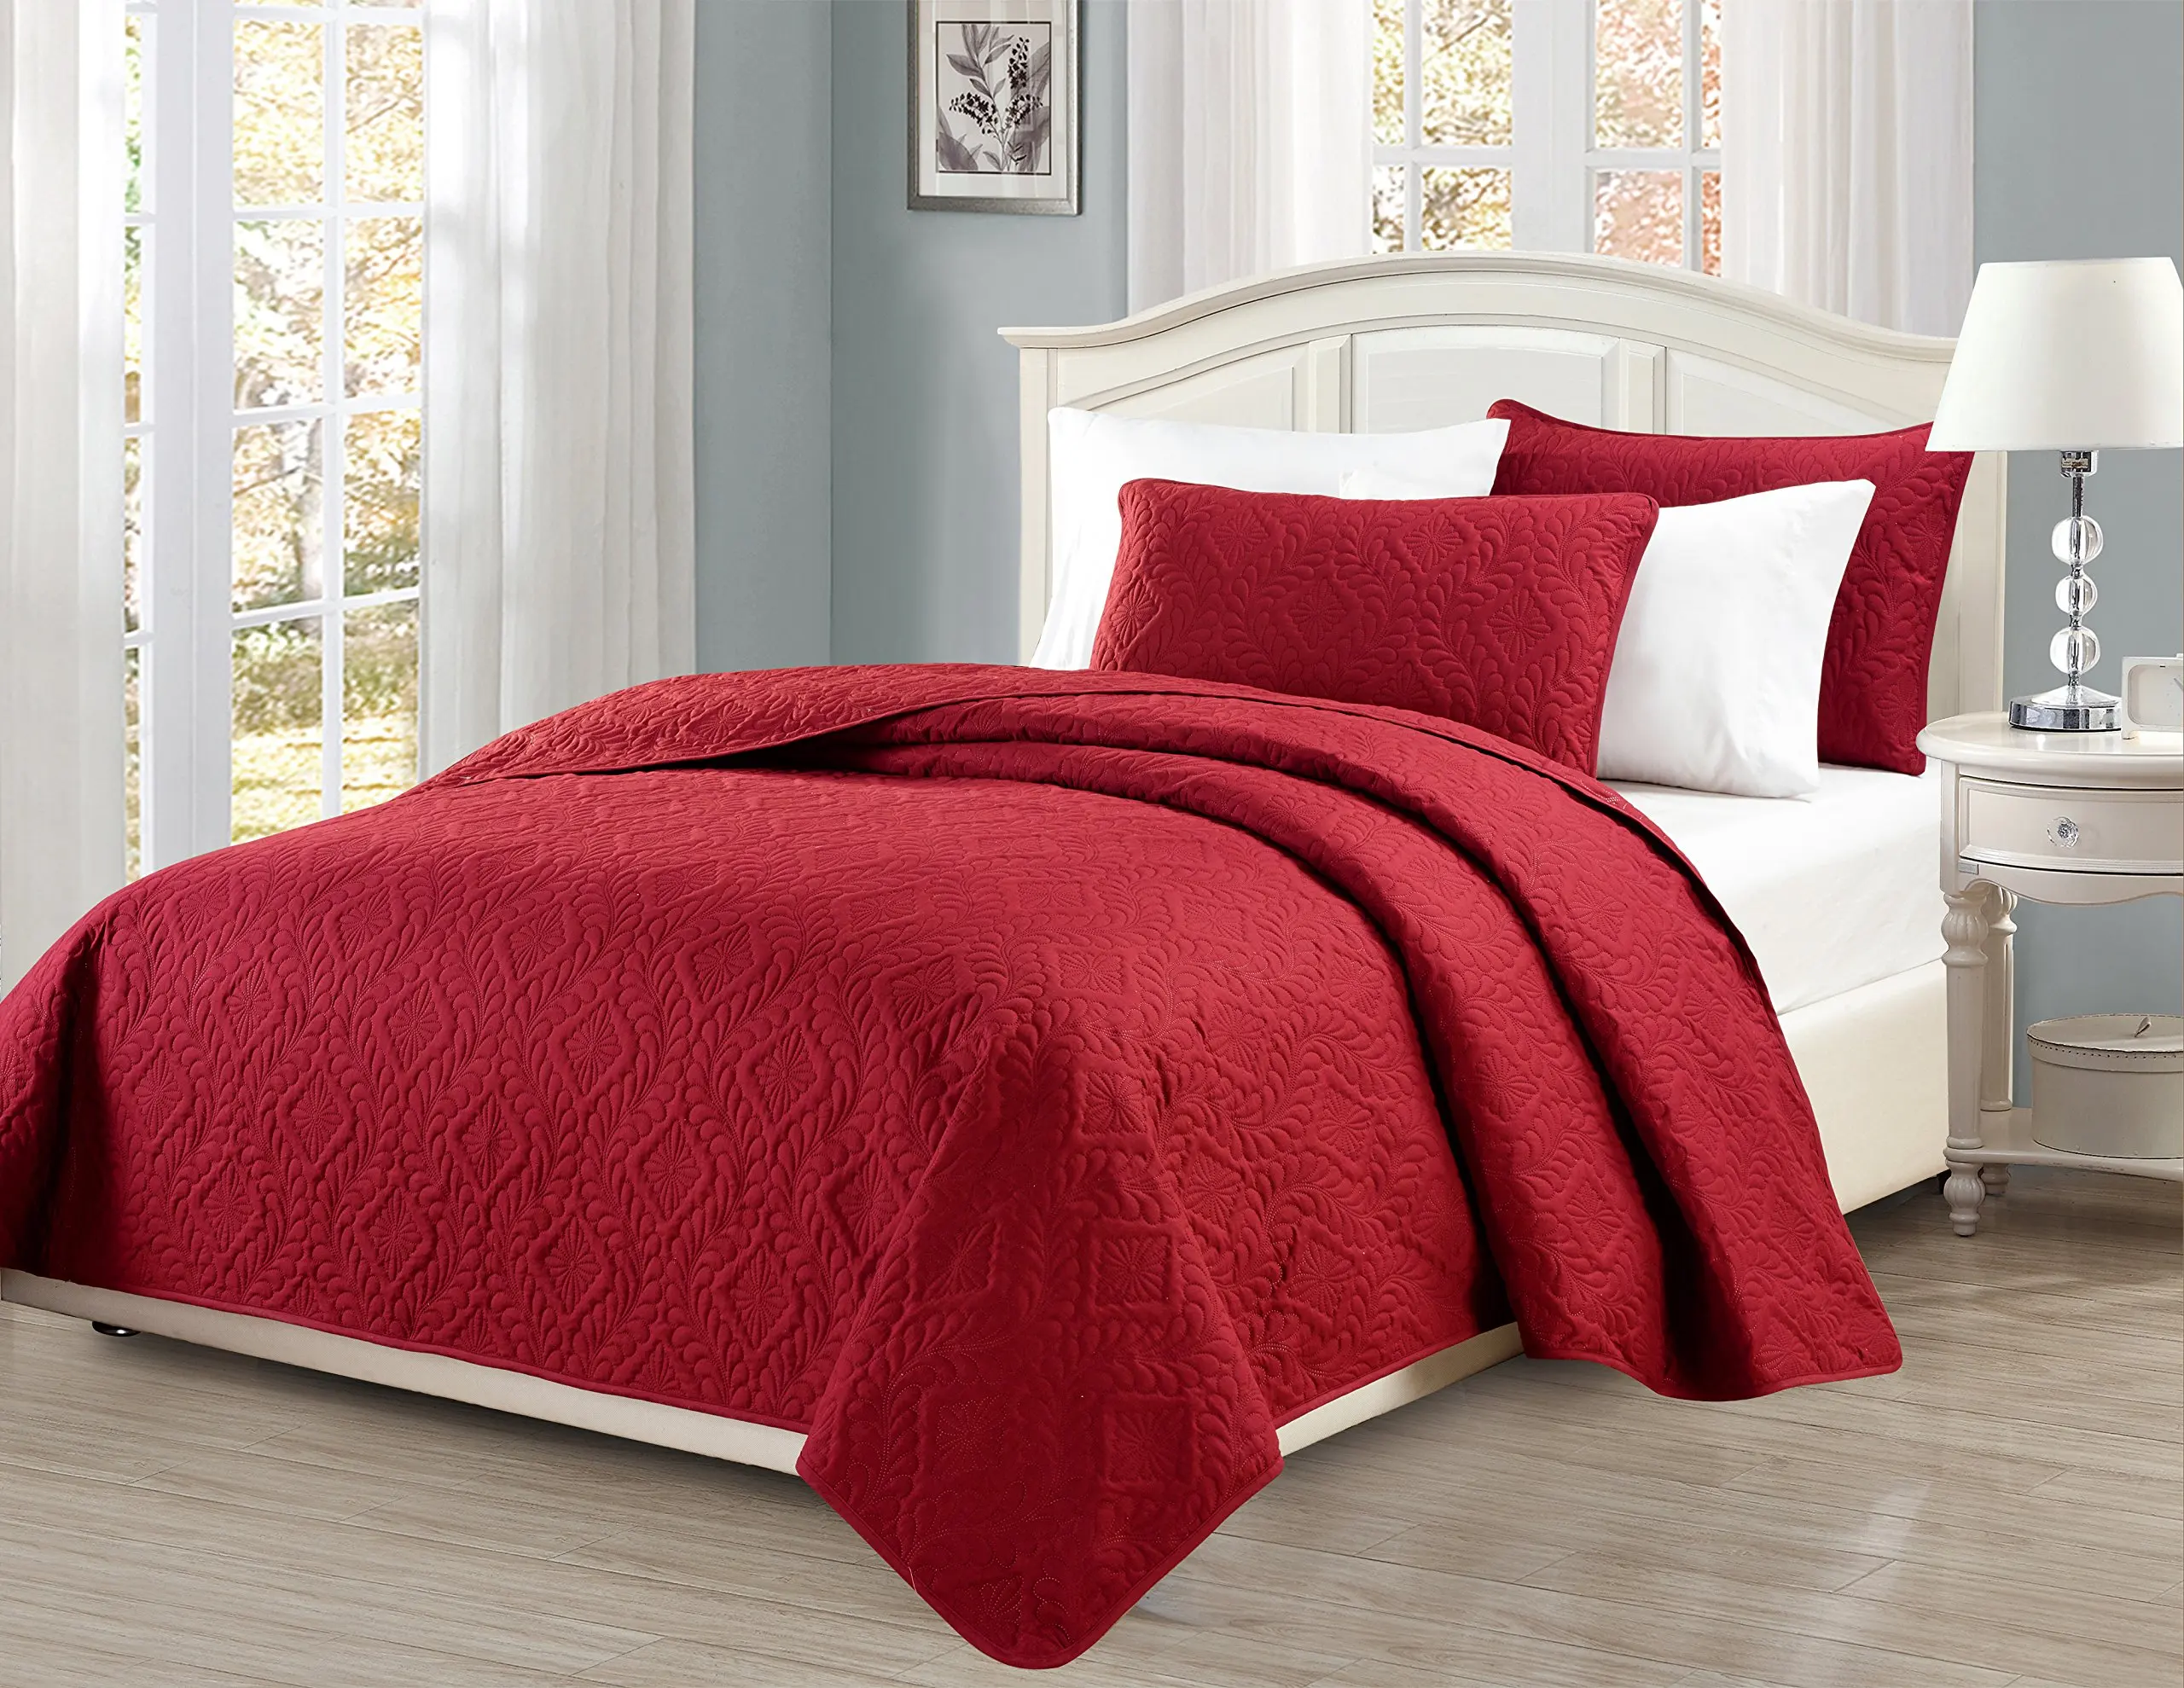 Cheap Red Coverlet King Find Red Coverlet King Deals On Line At